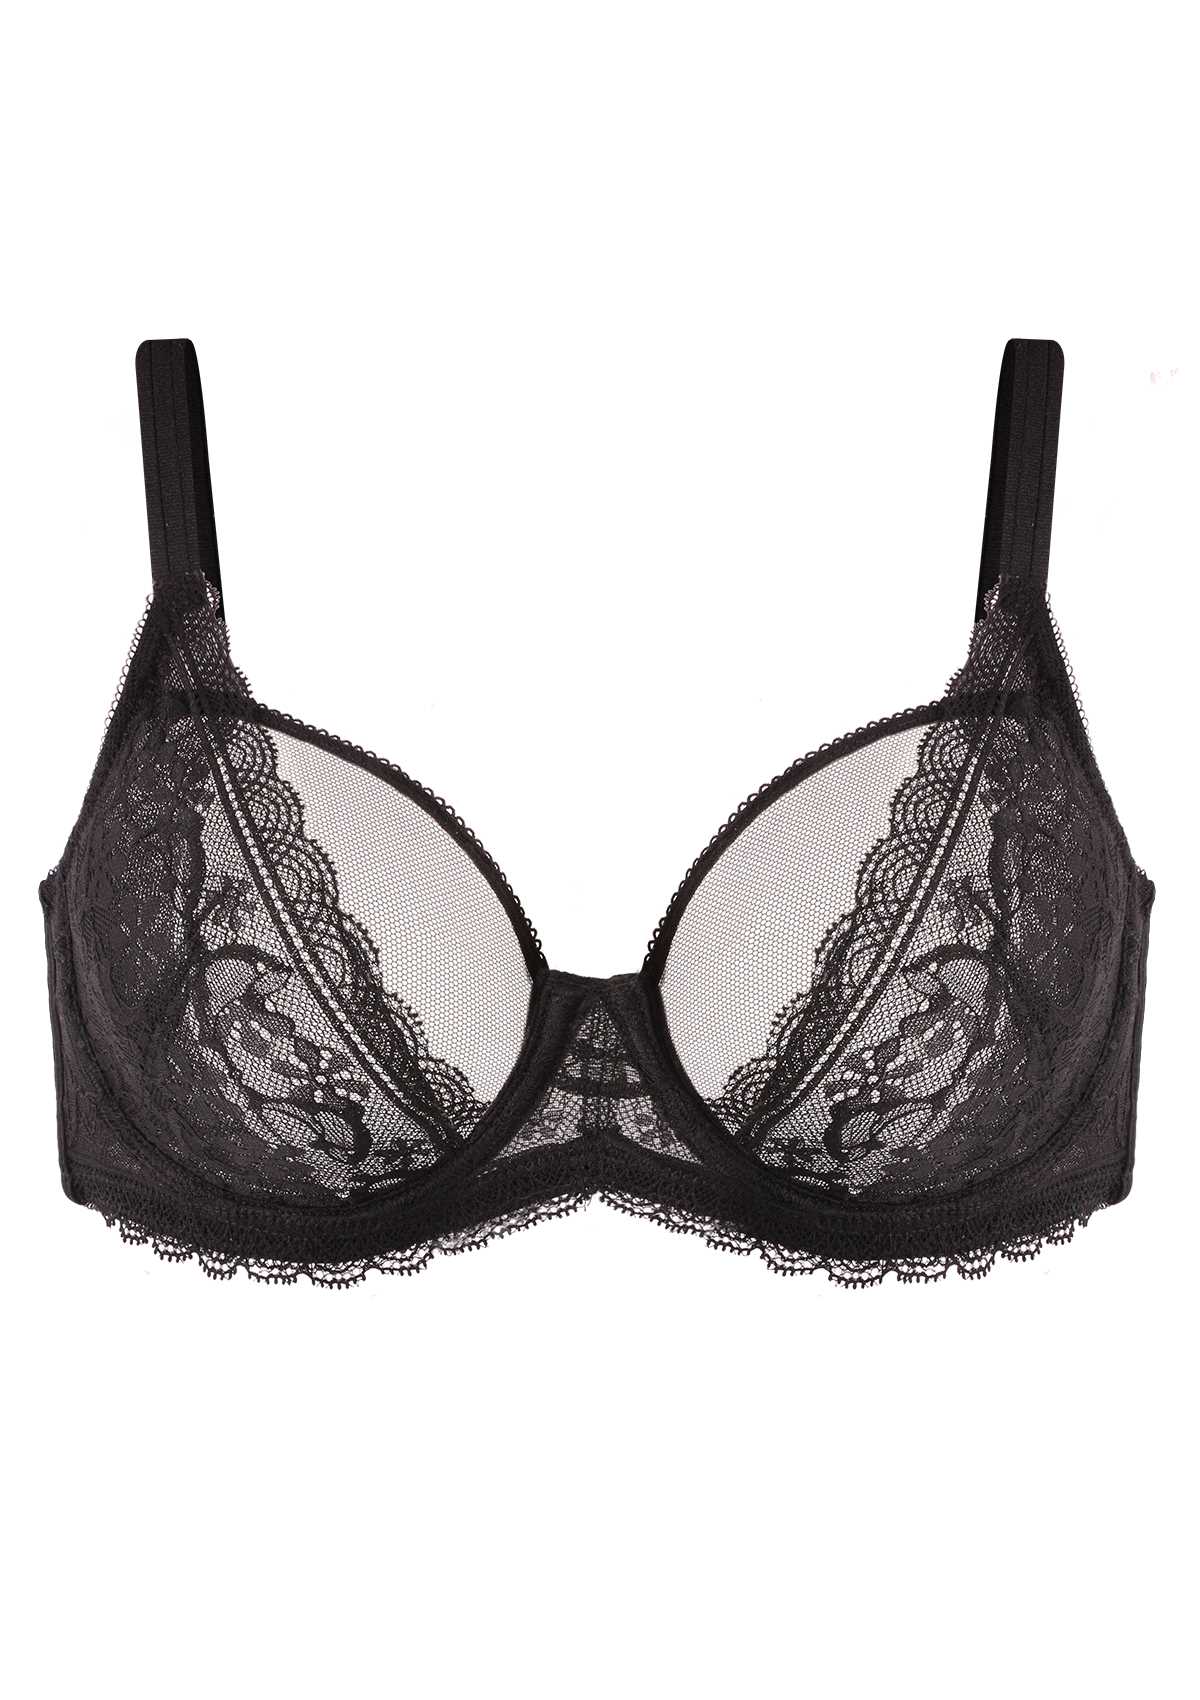 HSIA Anemone Lace Bra And Panties: Back Support Wired Bra - Black / 42 / D